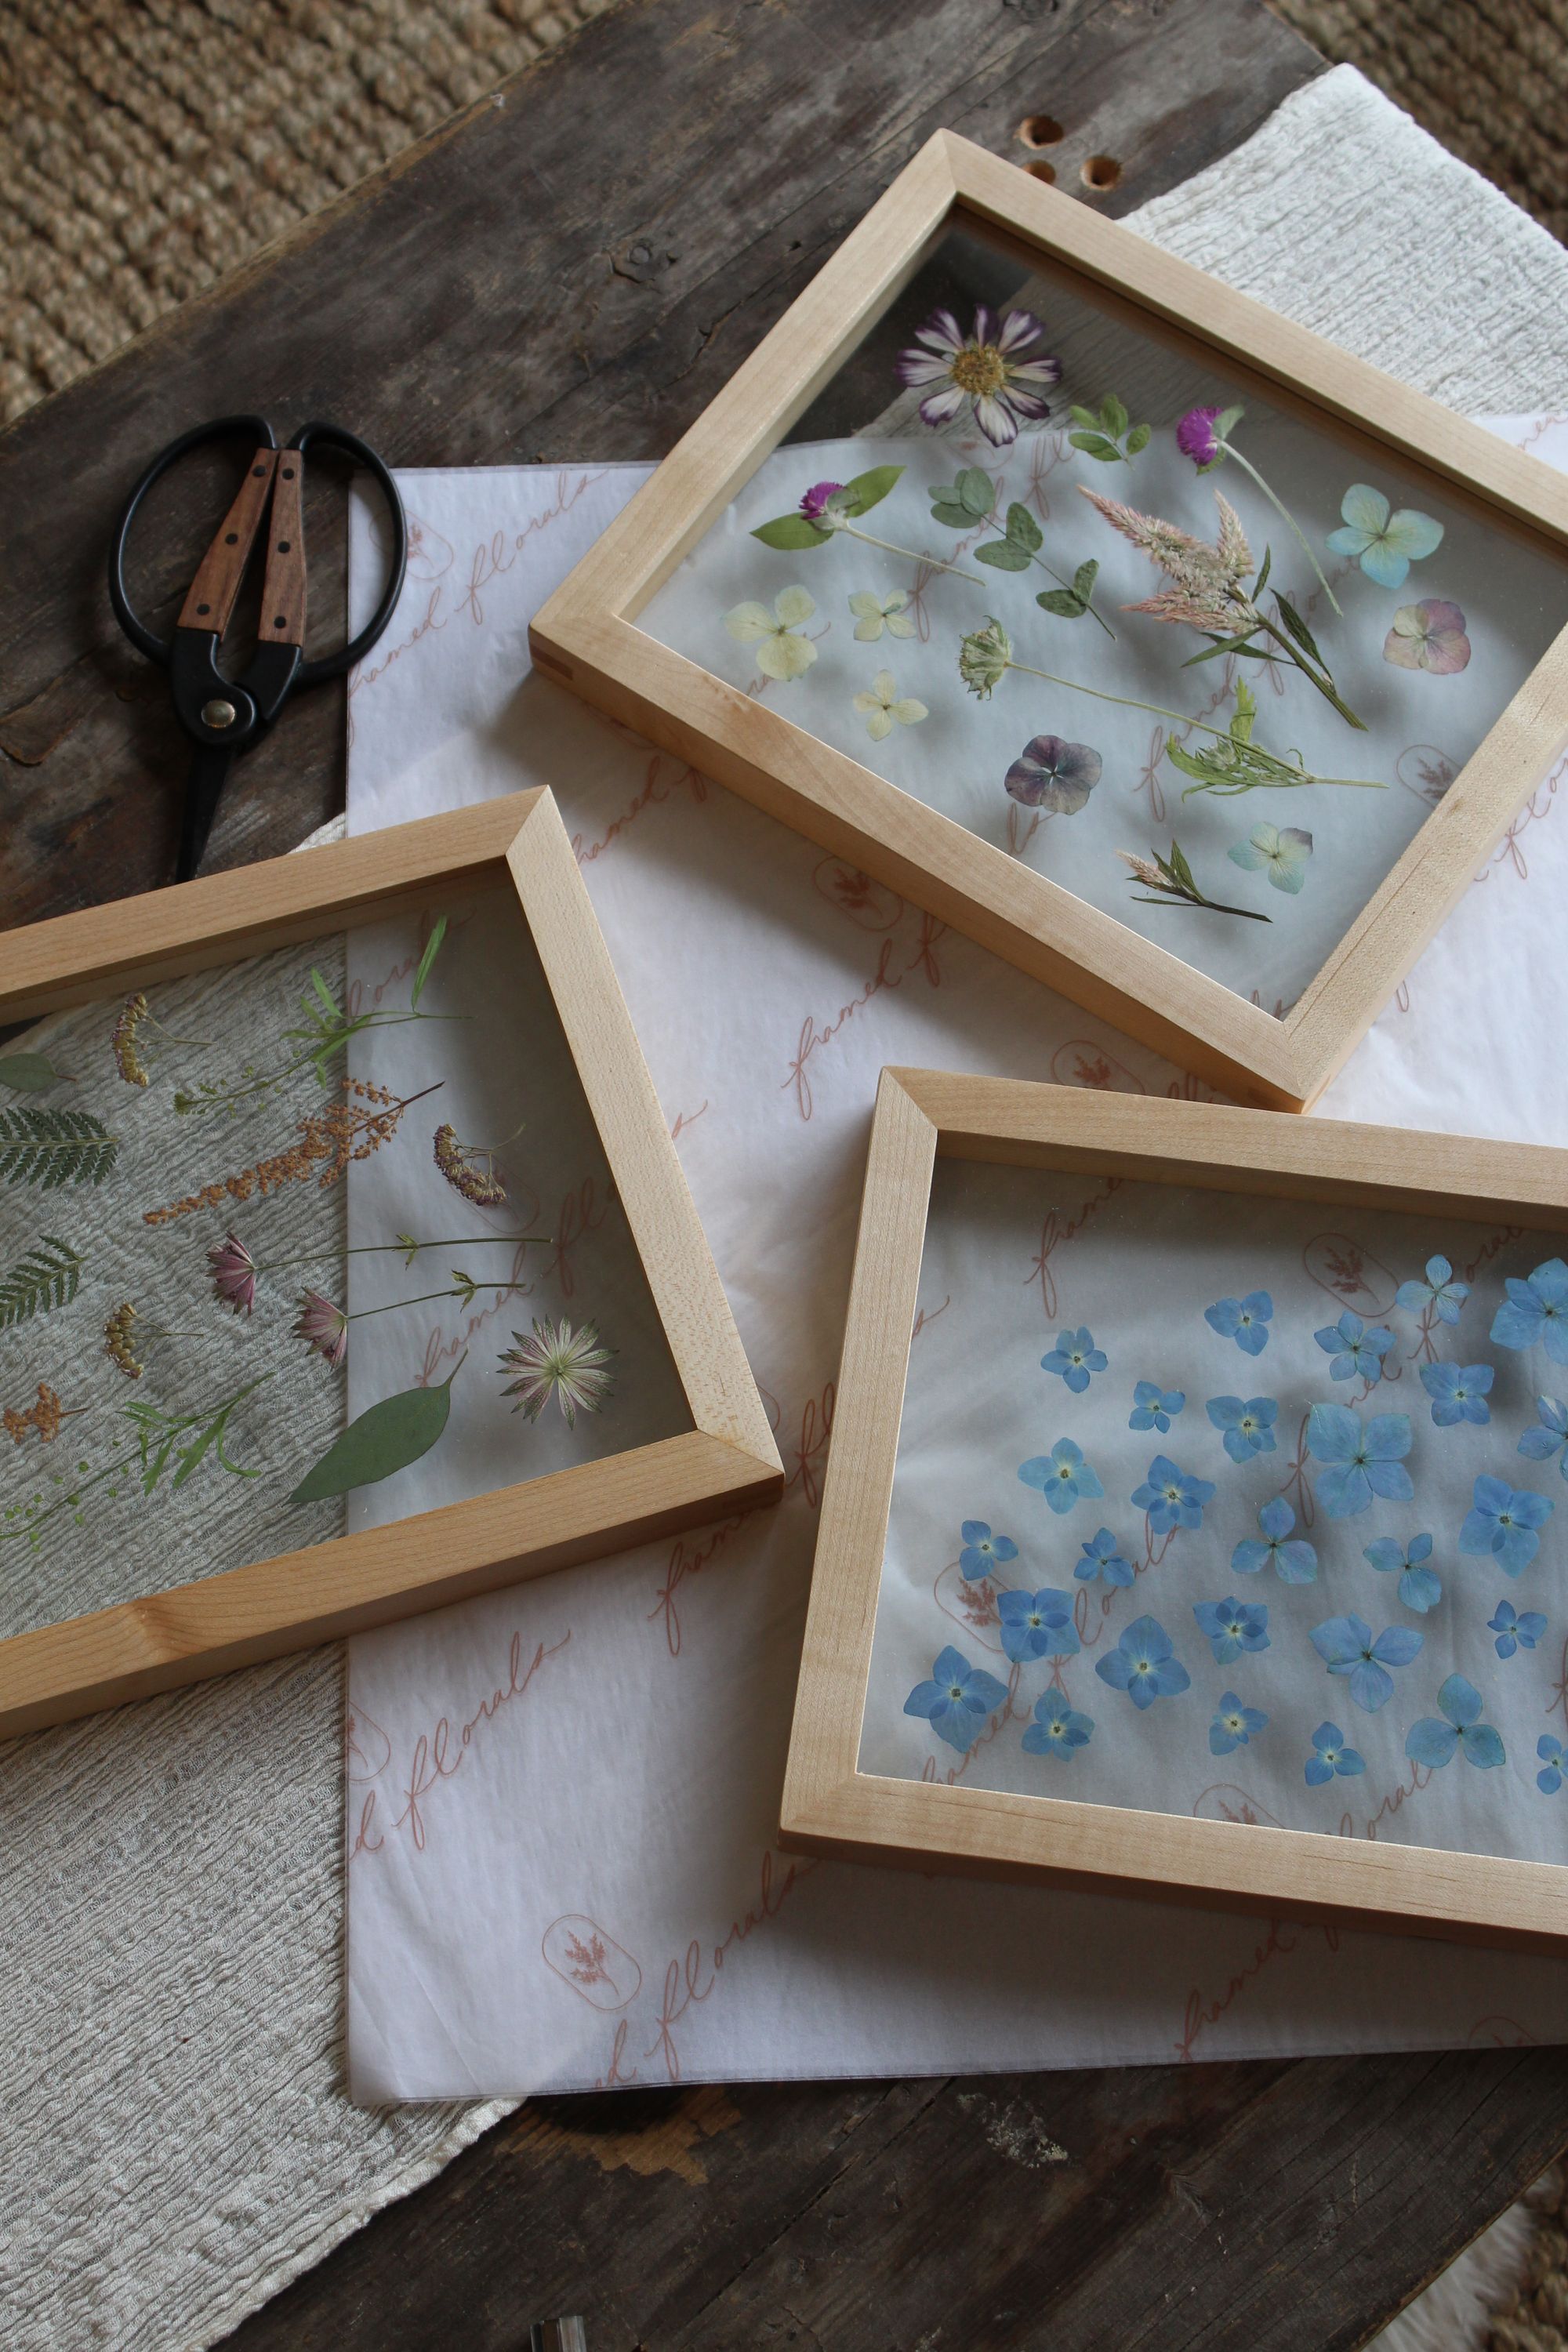 Preserving Lovely Memories to Cherish with Framed Florals